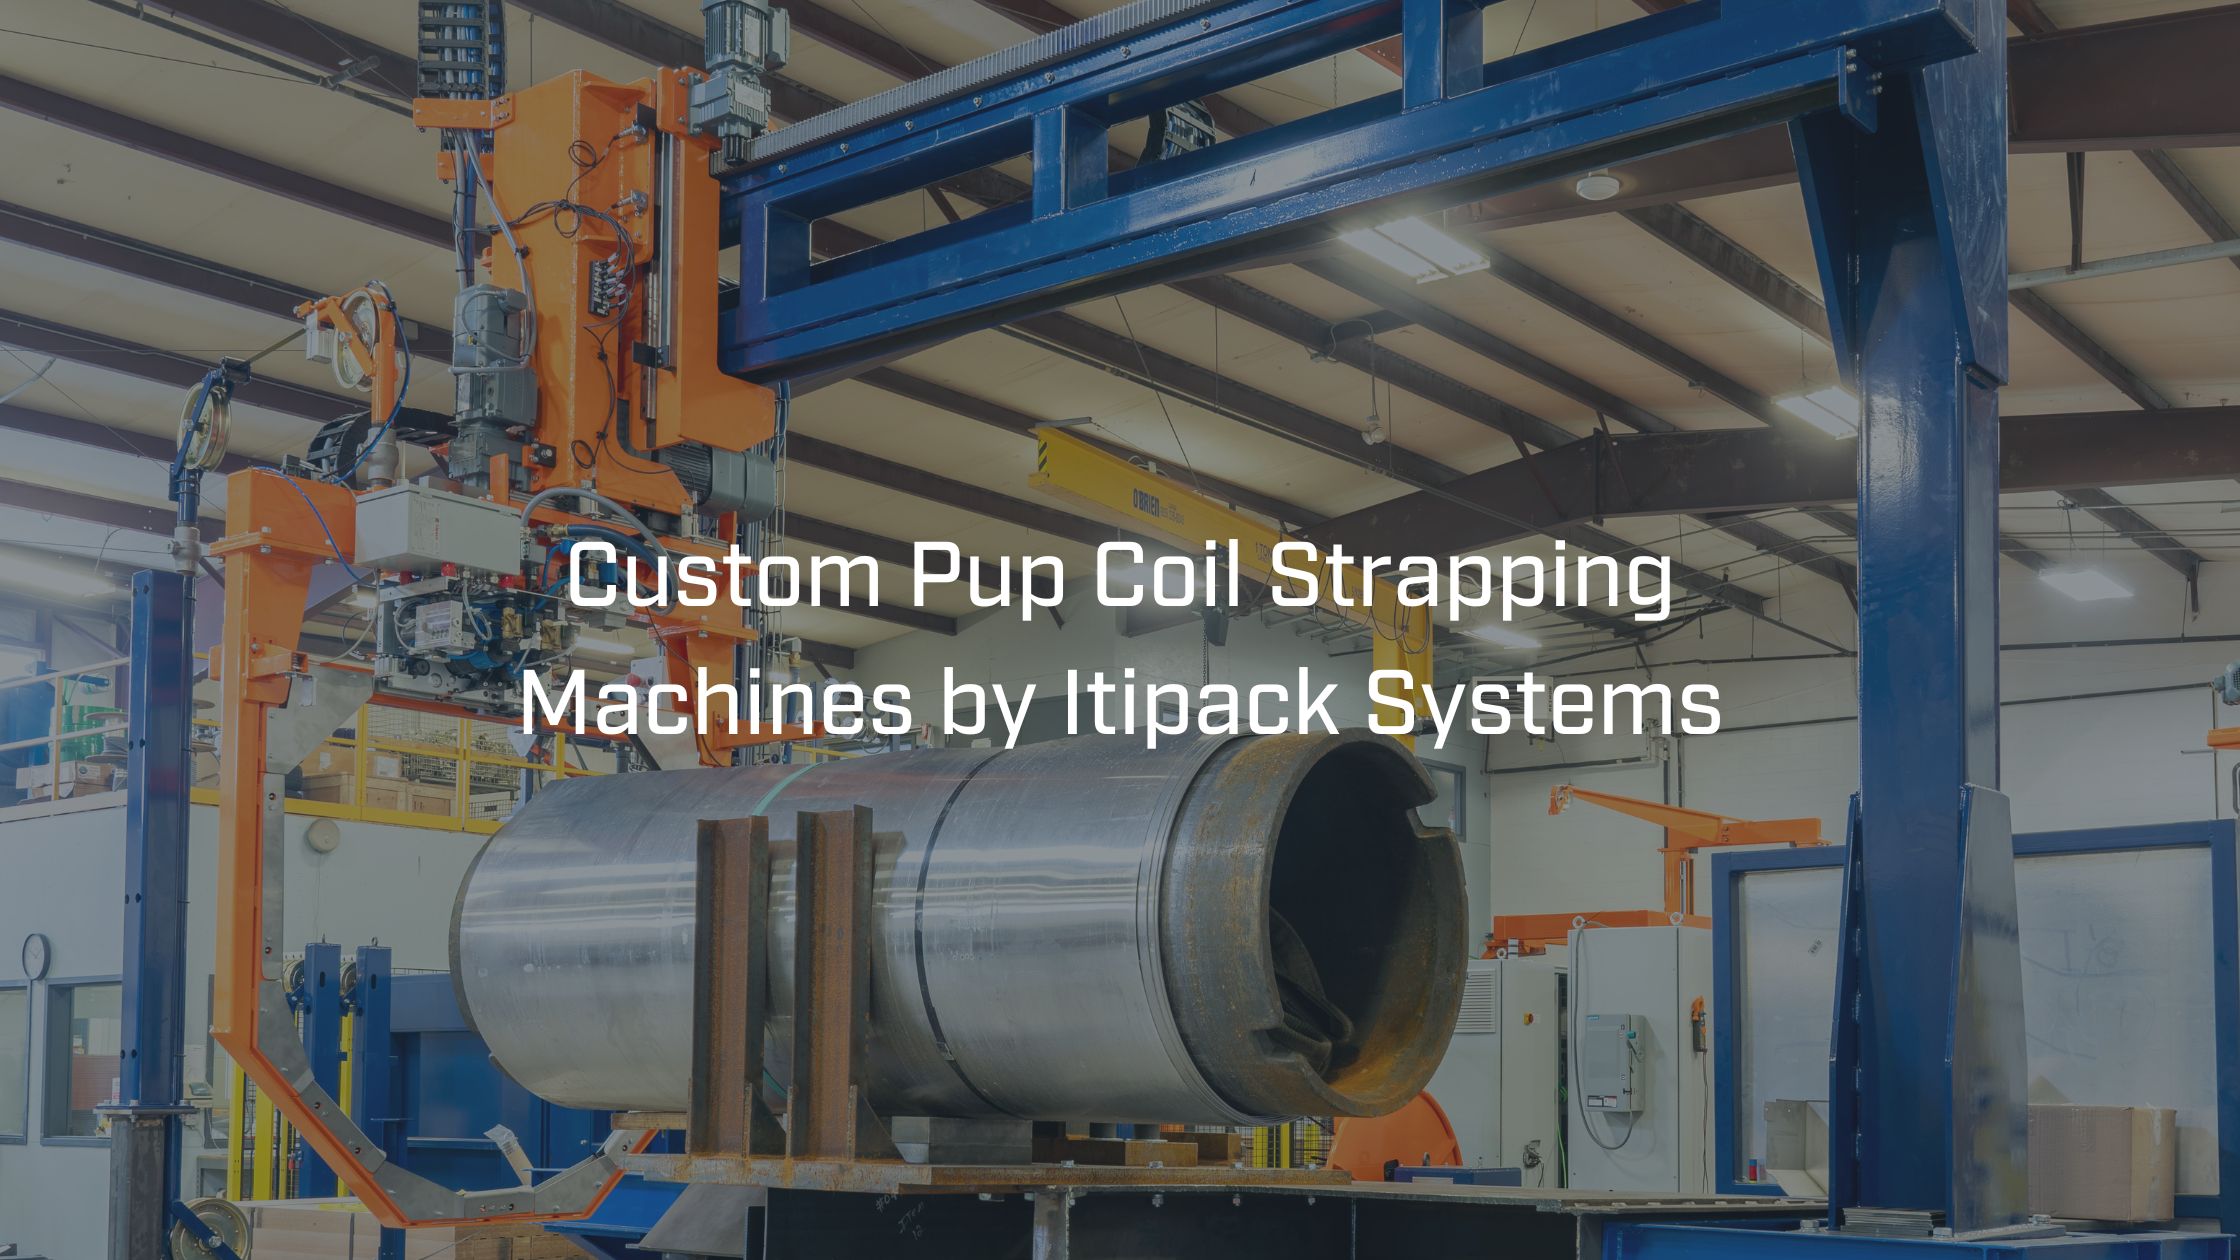 Custom Pup Coil Strapping Machines by Itipack Systems blog banner image